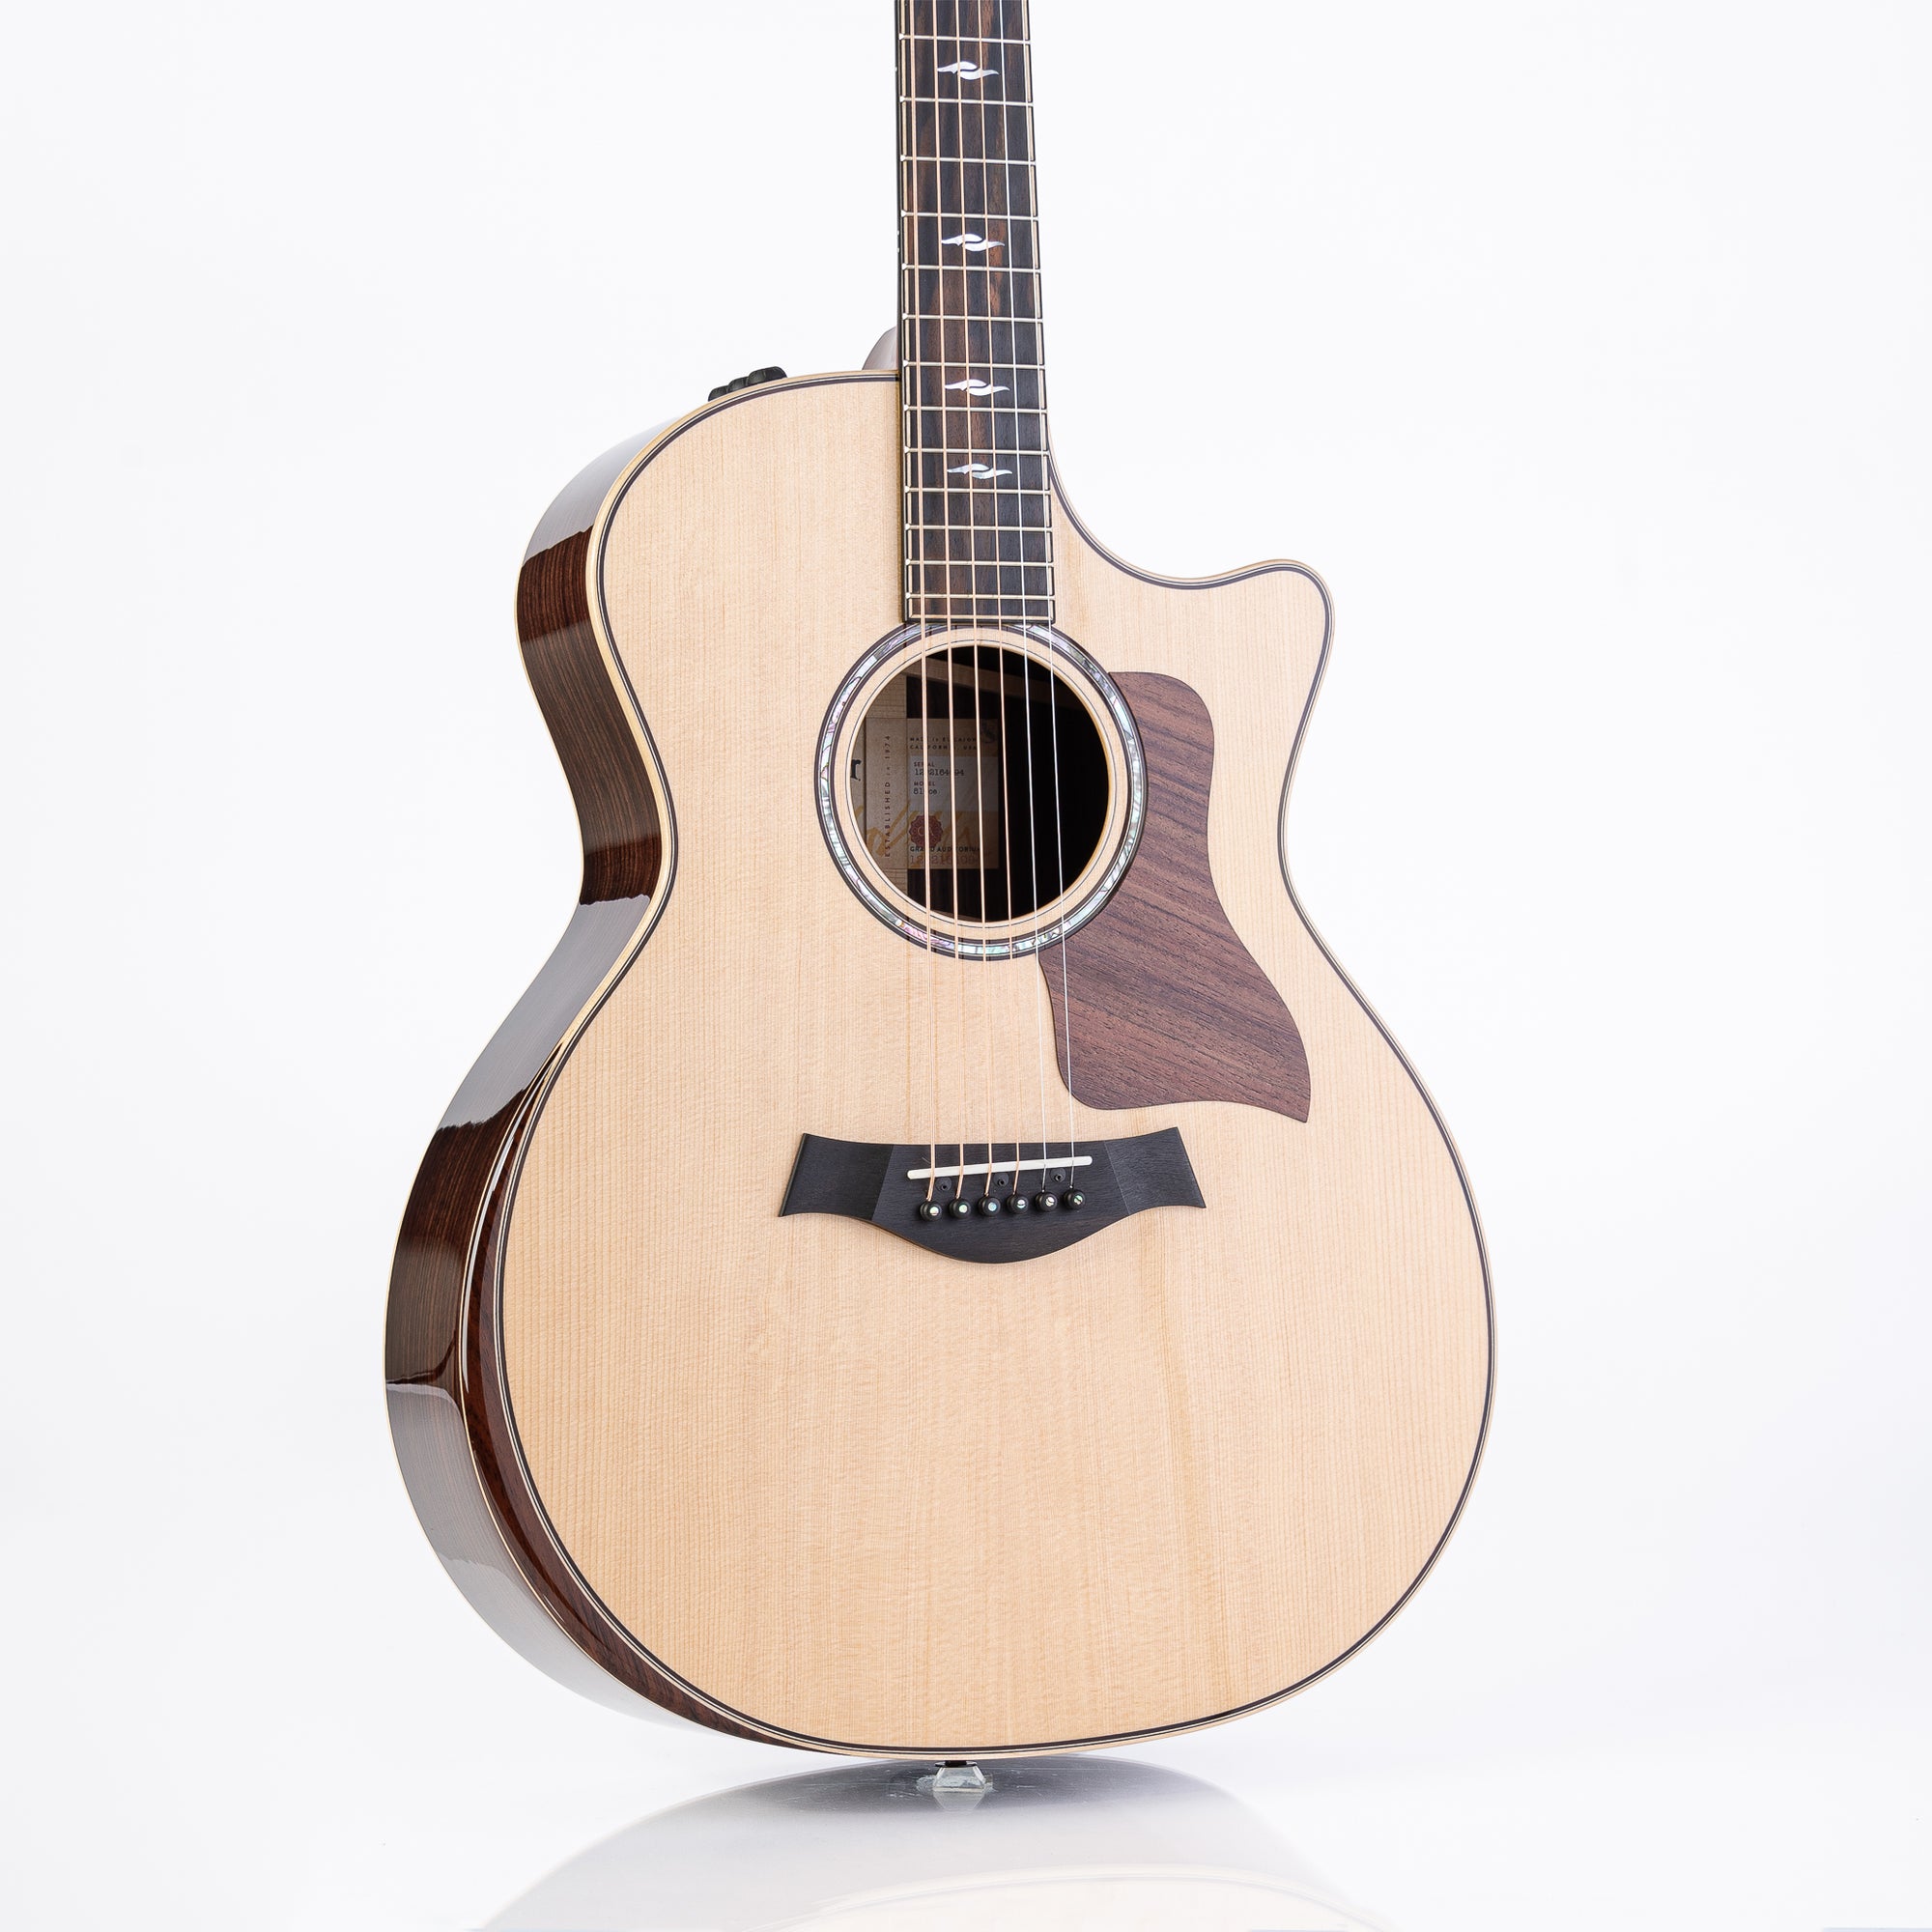 Taylor 814ce Grand Auditorium Acoustic Electric Guitar- Natural with HSC